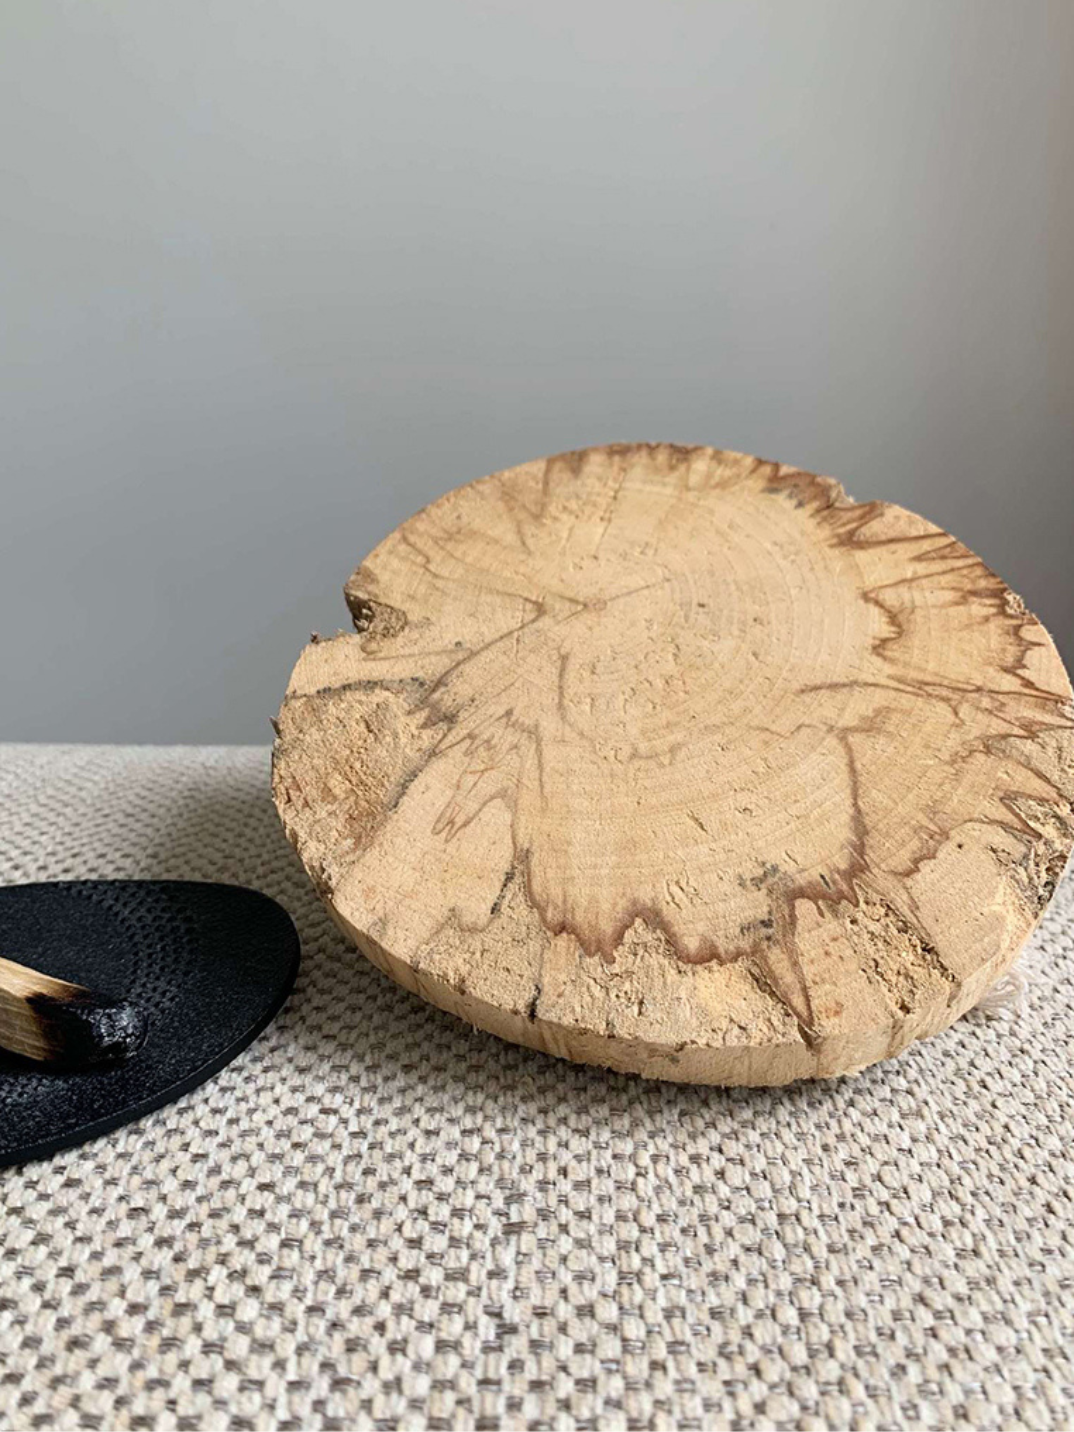 Palo Santo is a mystical tree that grows on the coast of South America and is related to Frankincense, Myrrh and Copal. It is enjoyed by many for its energetically cleansing and healing properties. 